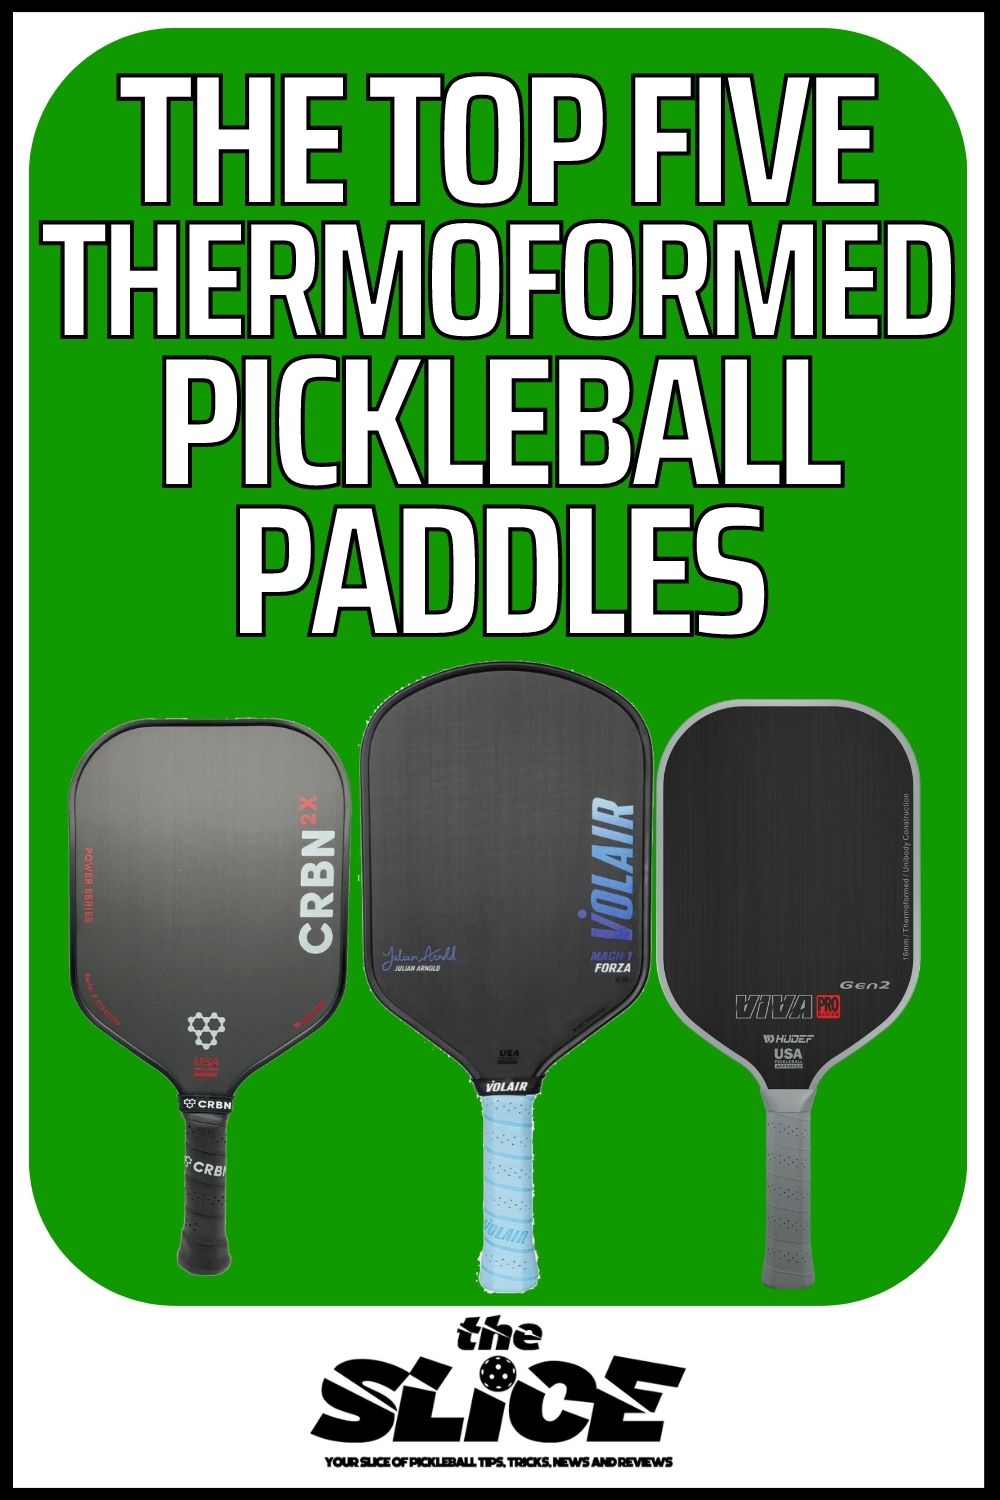 The Top Five Thermoformed Pickleball Paddles